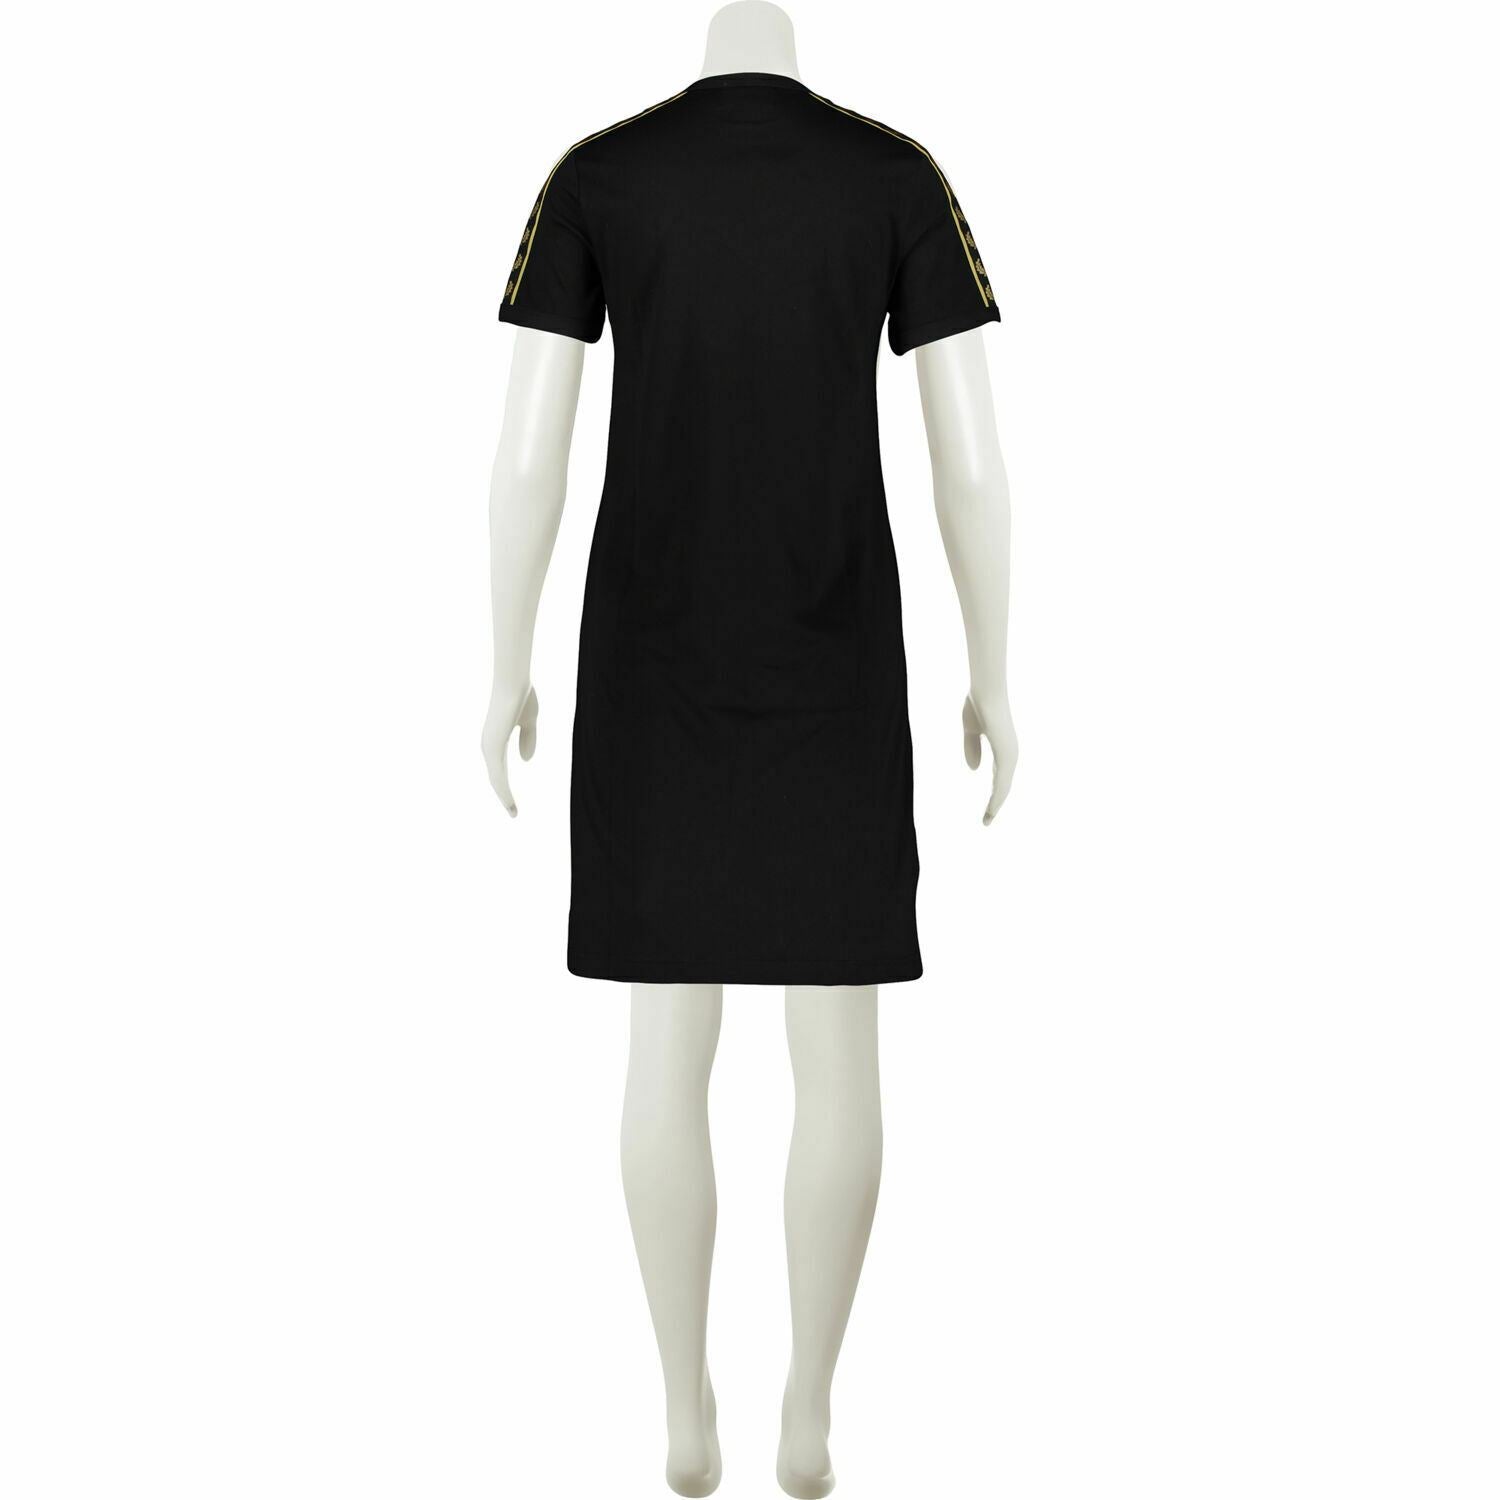 FRED PERRY Women's Taped Ringer T-shirt Dress, Black - size UK 10